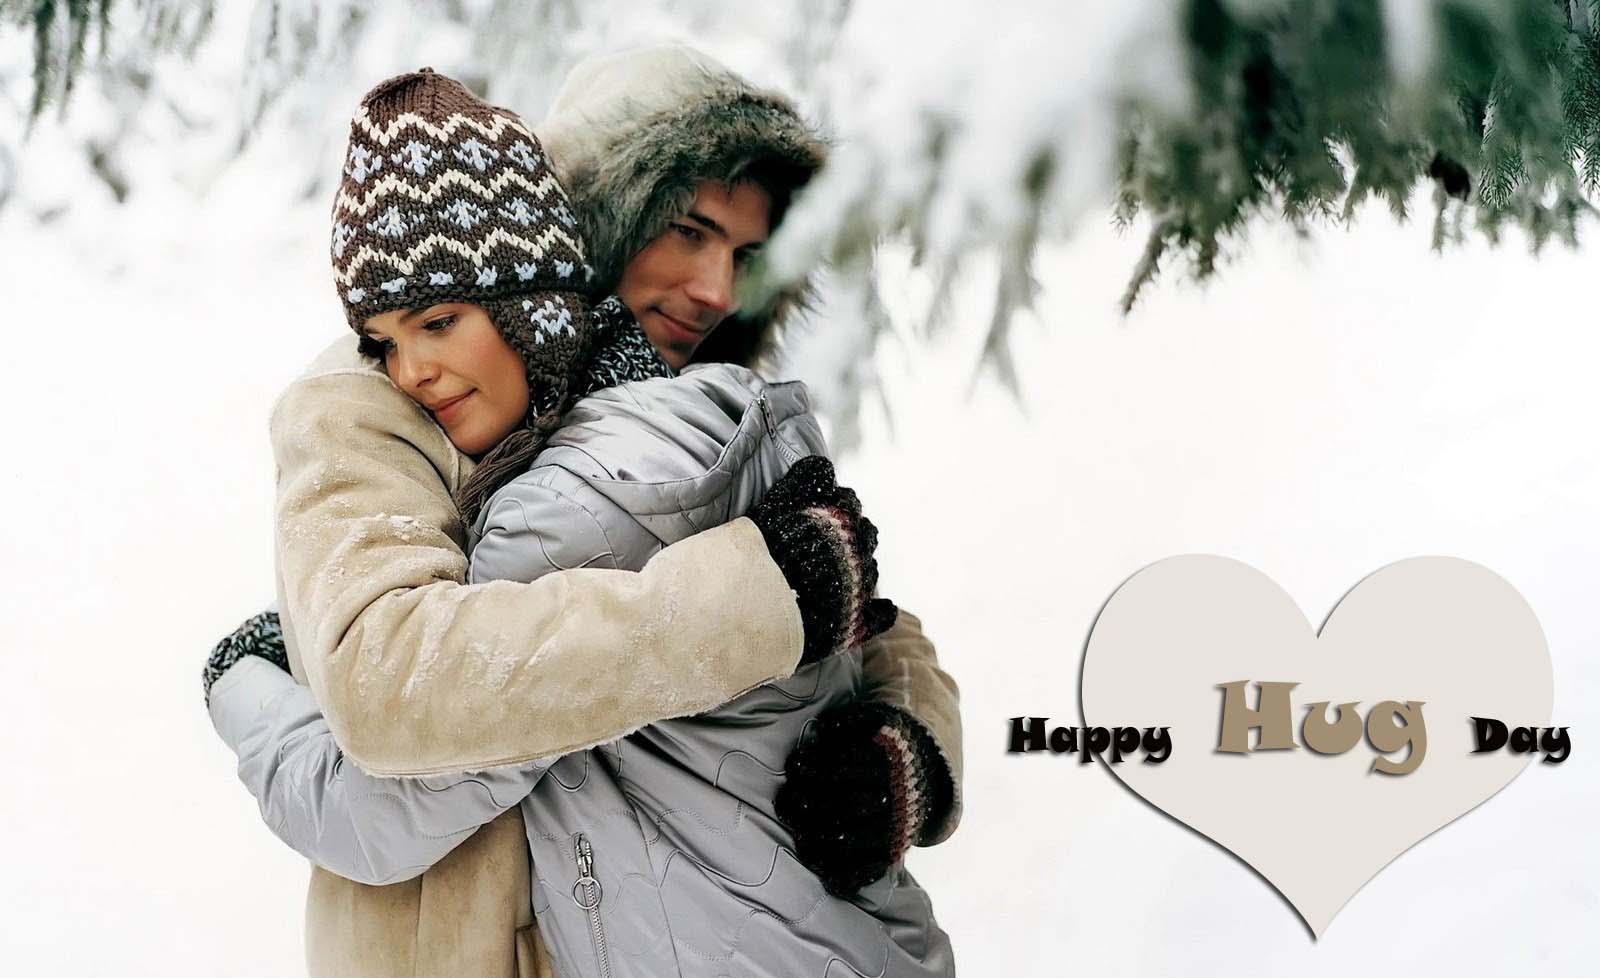 Love Cute Couple Wishes Hug Day Wallpaper 1600×978 - Happy Hug Day Image Hd 2017 , HD Wallpaper & Backgrounds